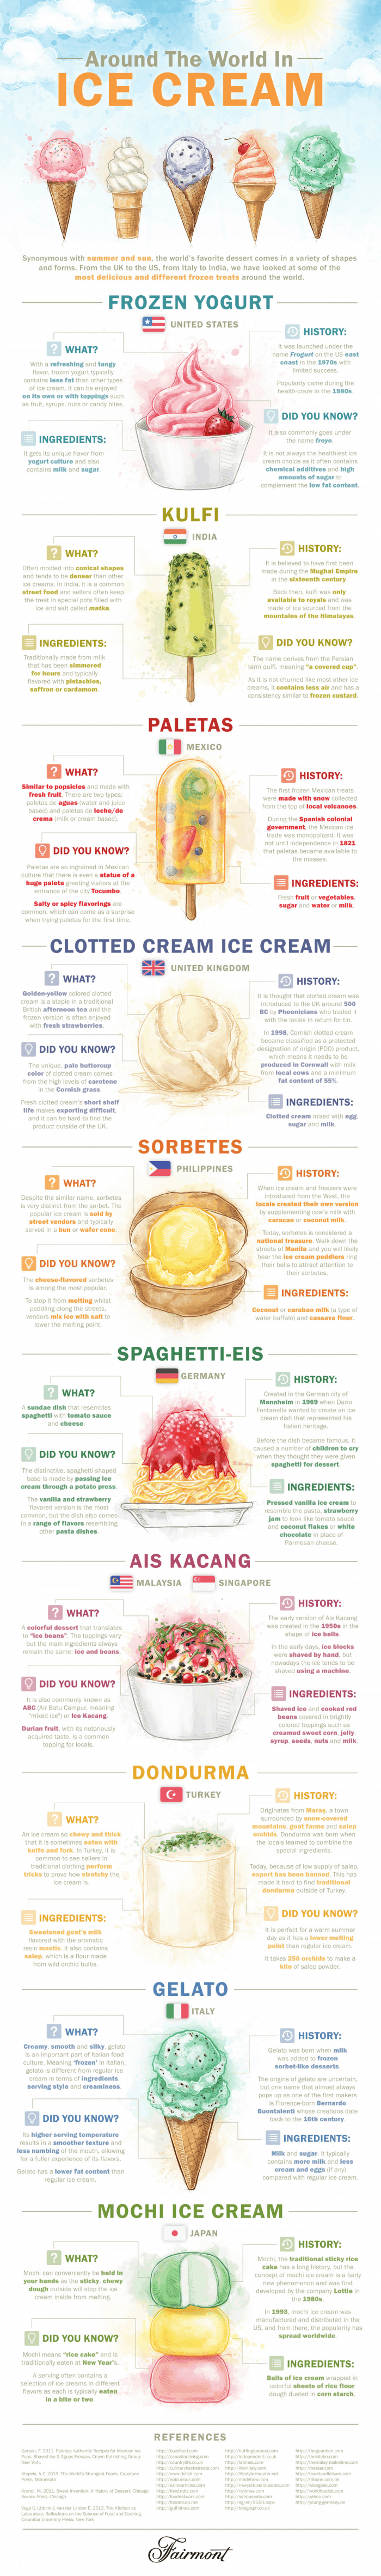 Infographic showing some interesting types of ice cream from around the world